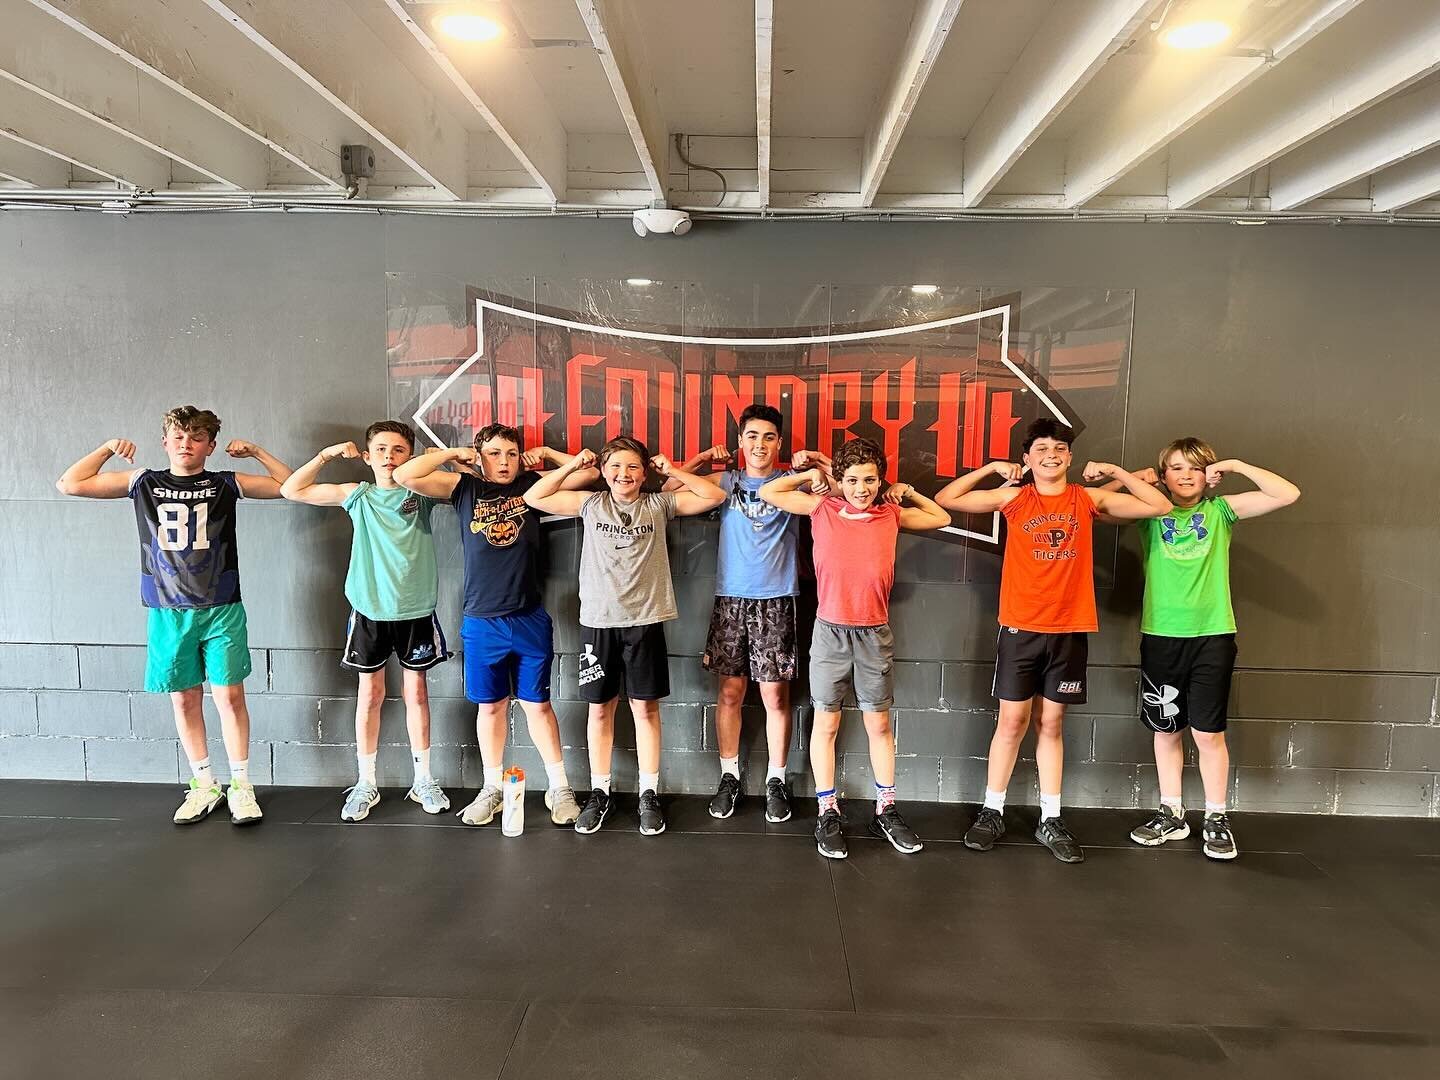 We had a blast kicking off our Foundry Teens program, these kids came in ready to work! 💪 
Want to be part of the fun?
Send us a DM to get your teen started. 
Classes are held on Tuesdays and Thursdays at 3:30pm.
Spots are limited. 
See you on Tuesd